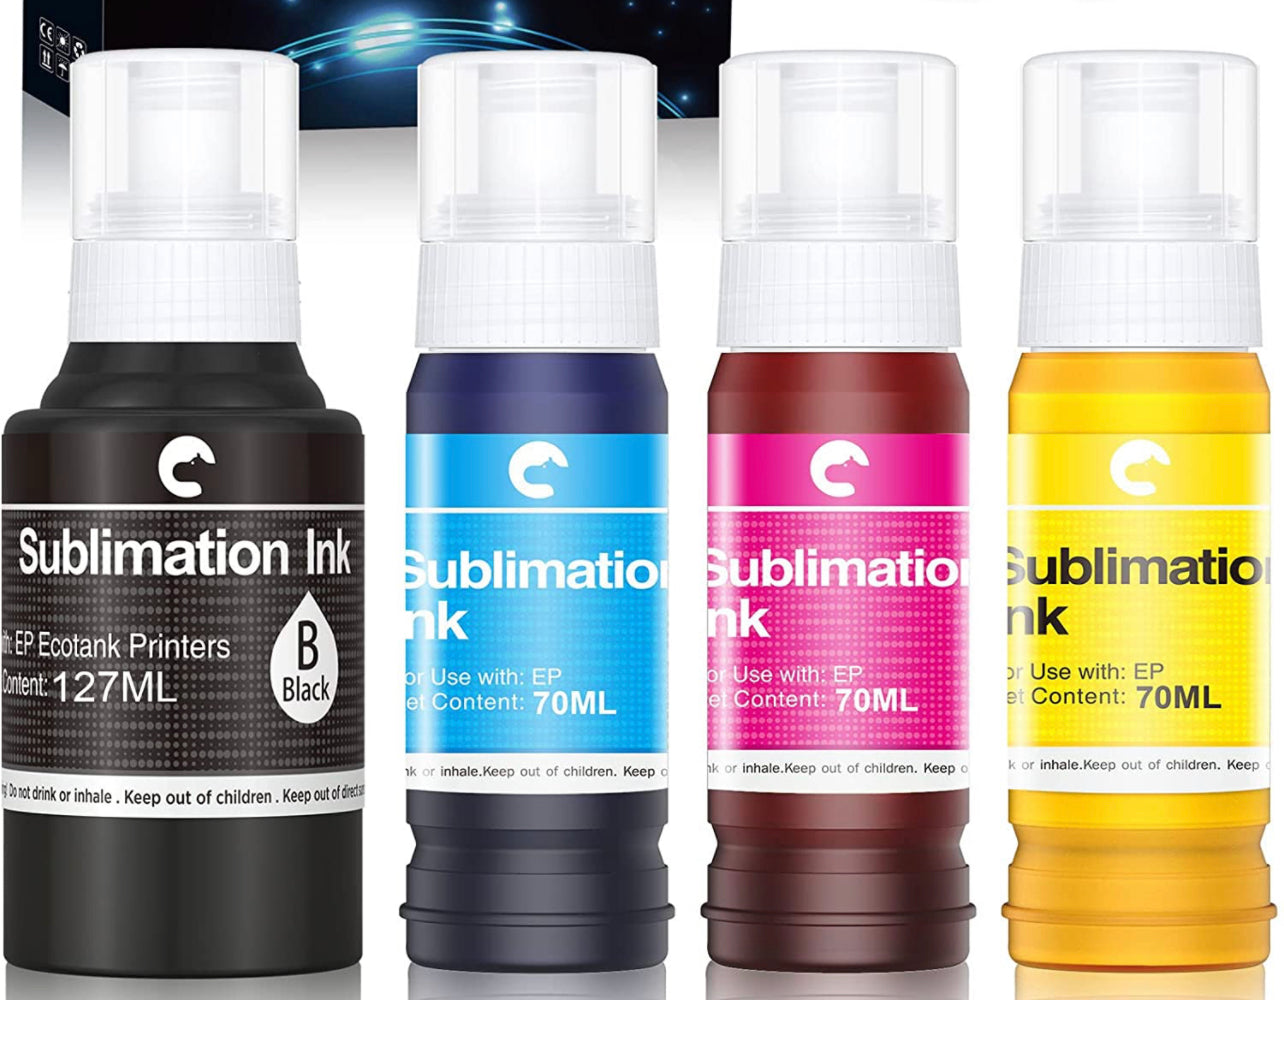 Hiipoo Sublimation Ink Fit for Supertank Inkjet Printer ET-2400 ET-2720  ET-2760 ET-2800 ET-2803 ET-2830 ET-2850 ET-3760 ET-4800 ET-7720 ET-15000  /Upgrade Version/Free ICC Printing 